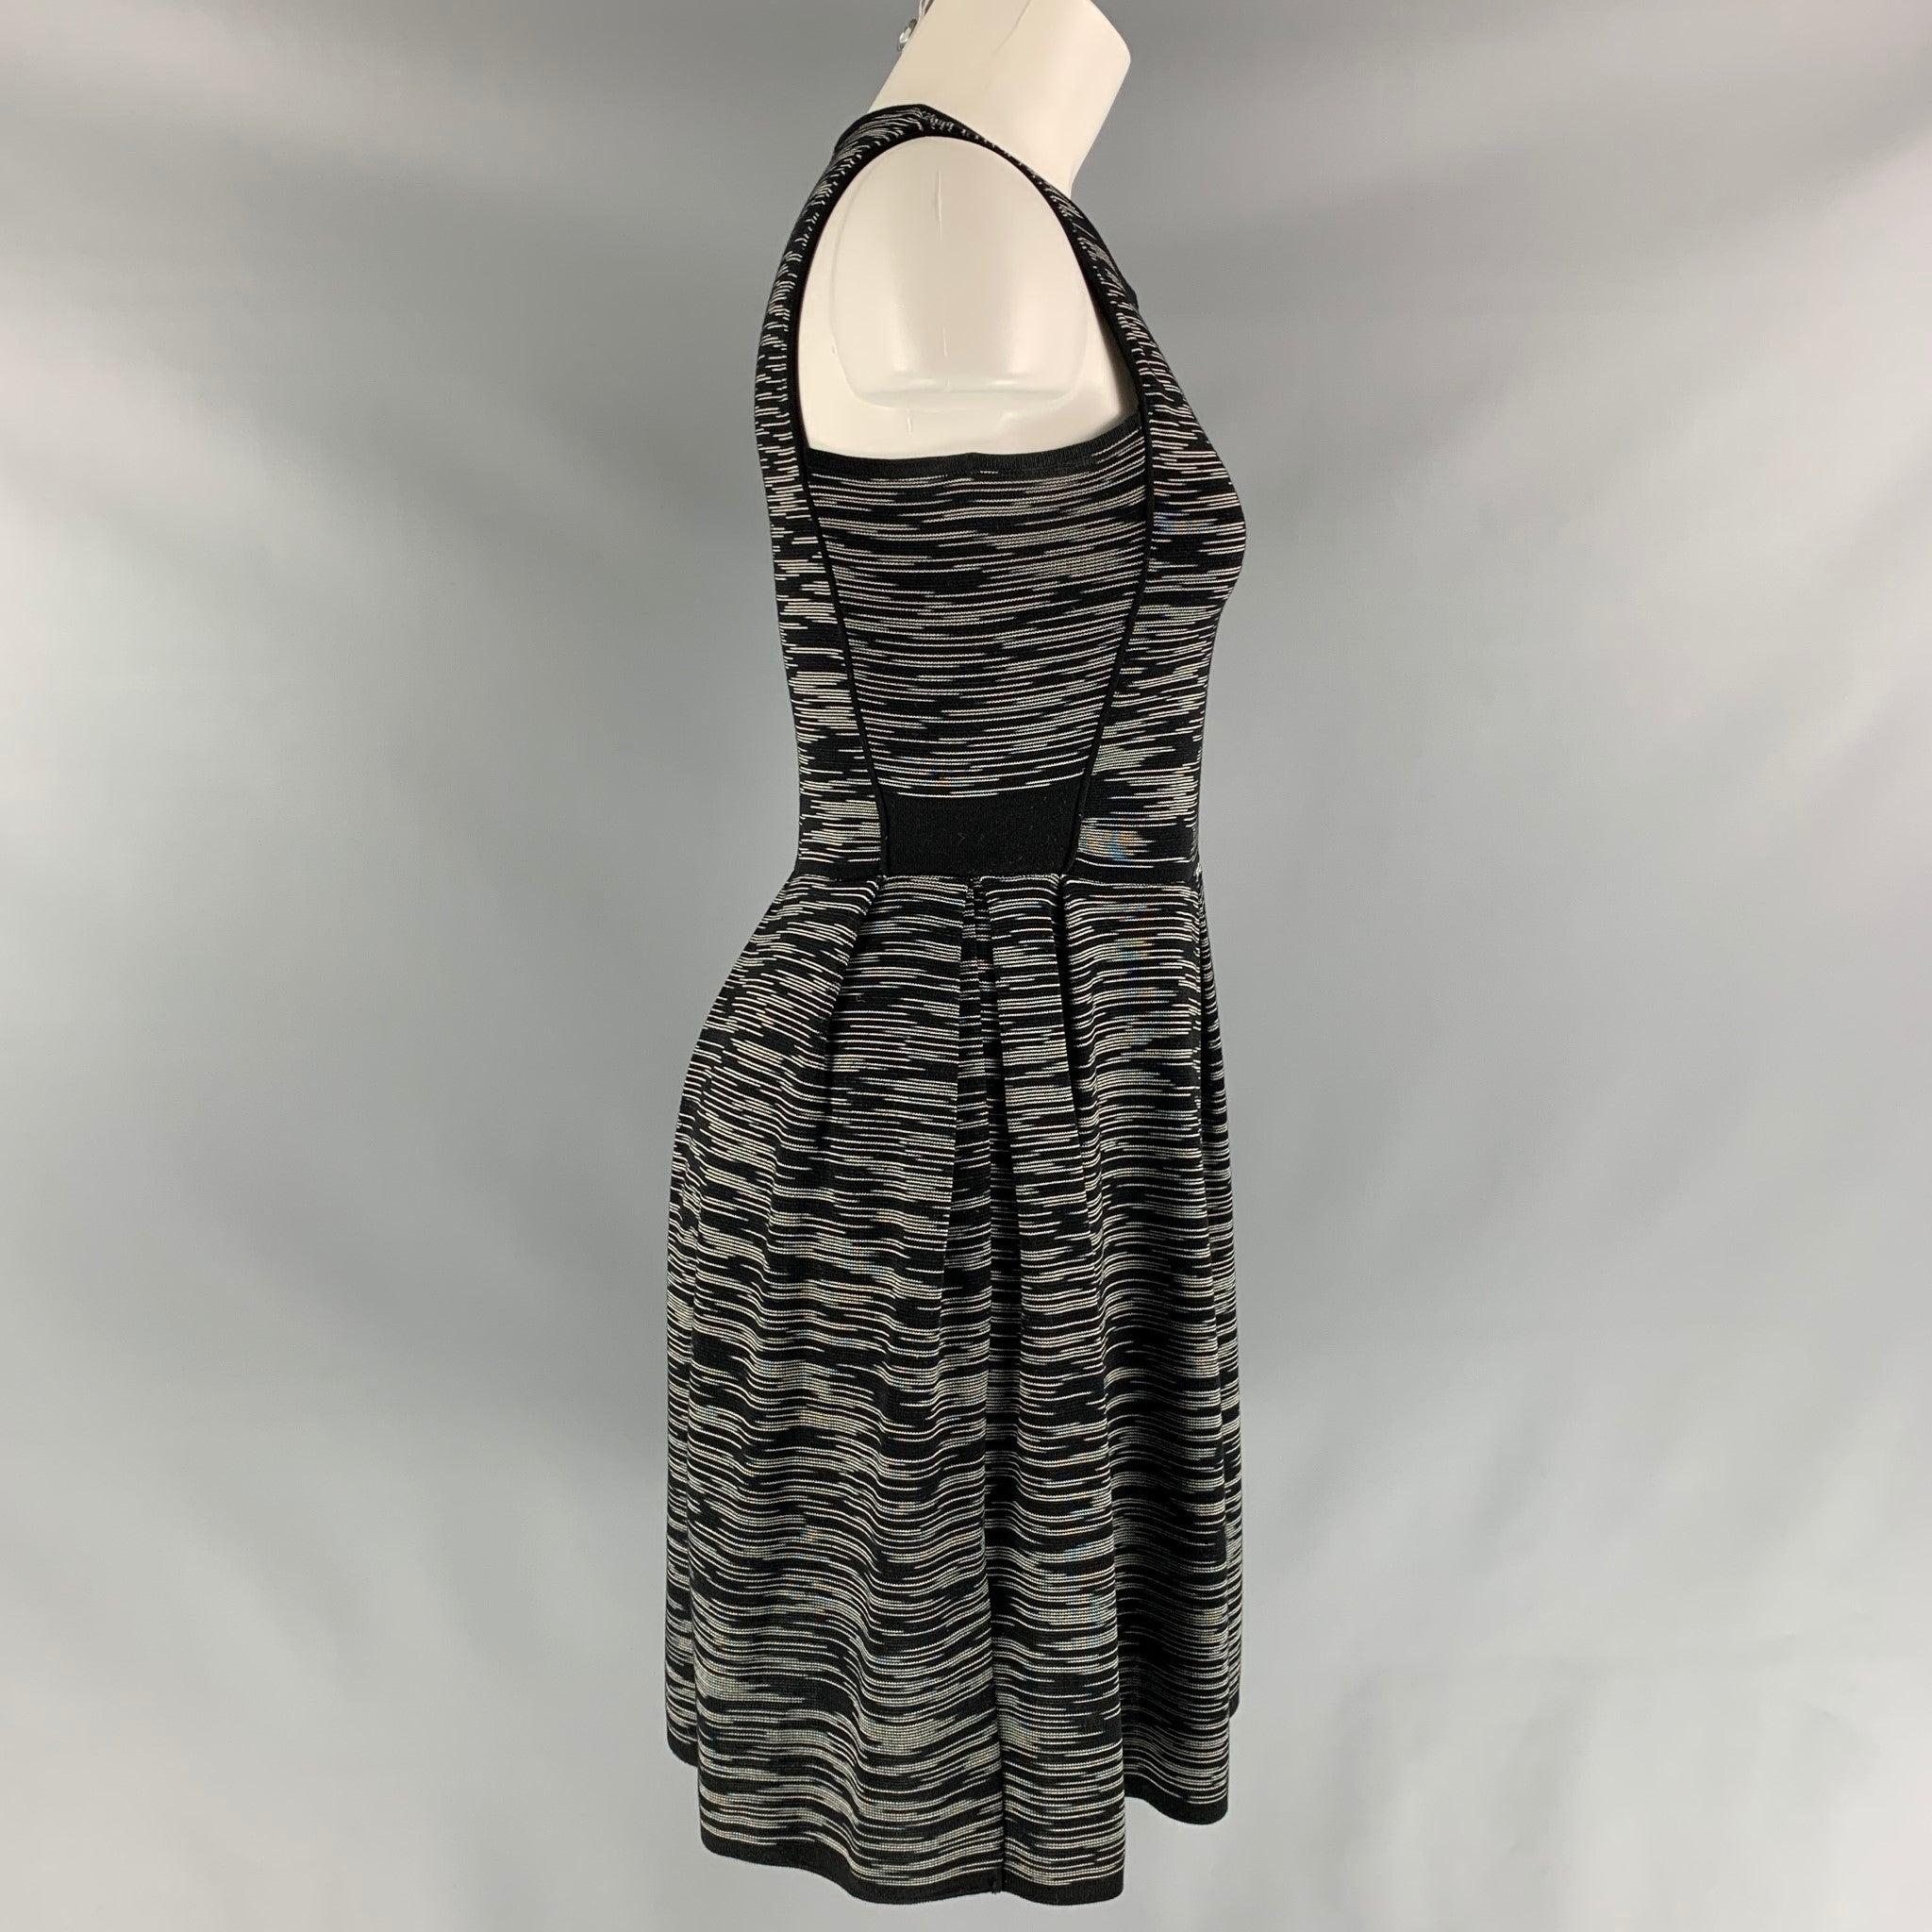 M MISSONI sleeveless A-lined dress comes in a black and white knitted fabric and full lining.
Very Good Pre-Owned Condition. Fabric Tag Removed. 

Marked:   40  

Measurements: 
 
Shoulder: 12 inBust: 32 inWaist: 28 inHip: 34 inLength: 36 in

  
  
